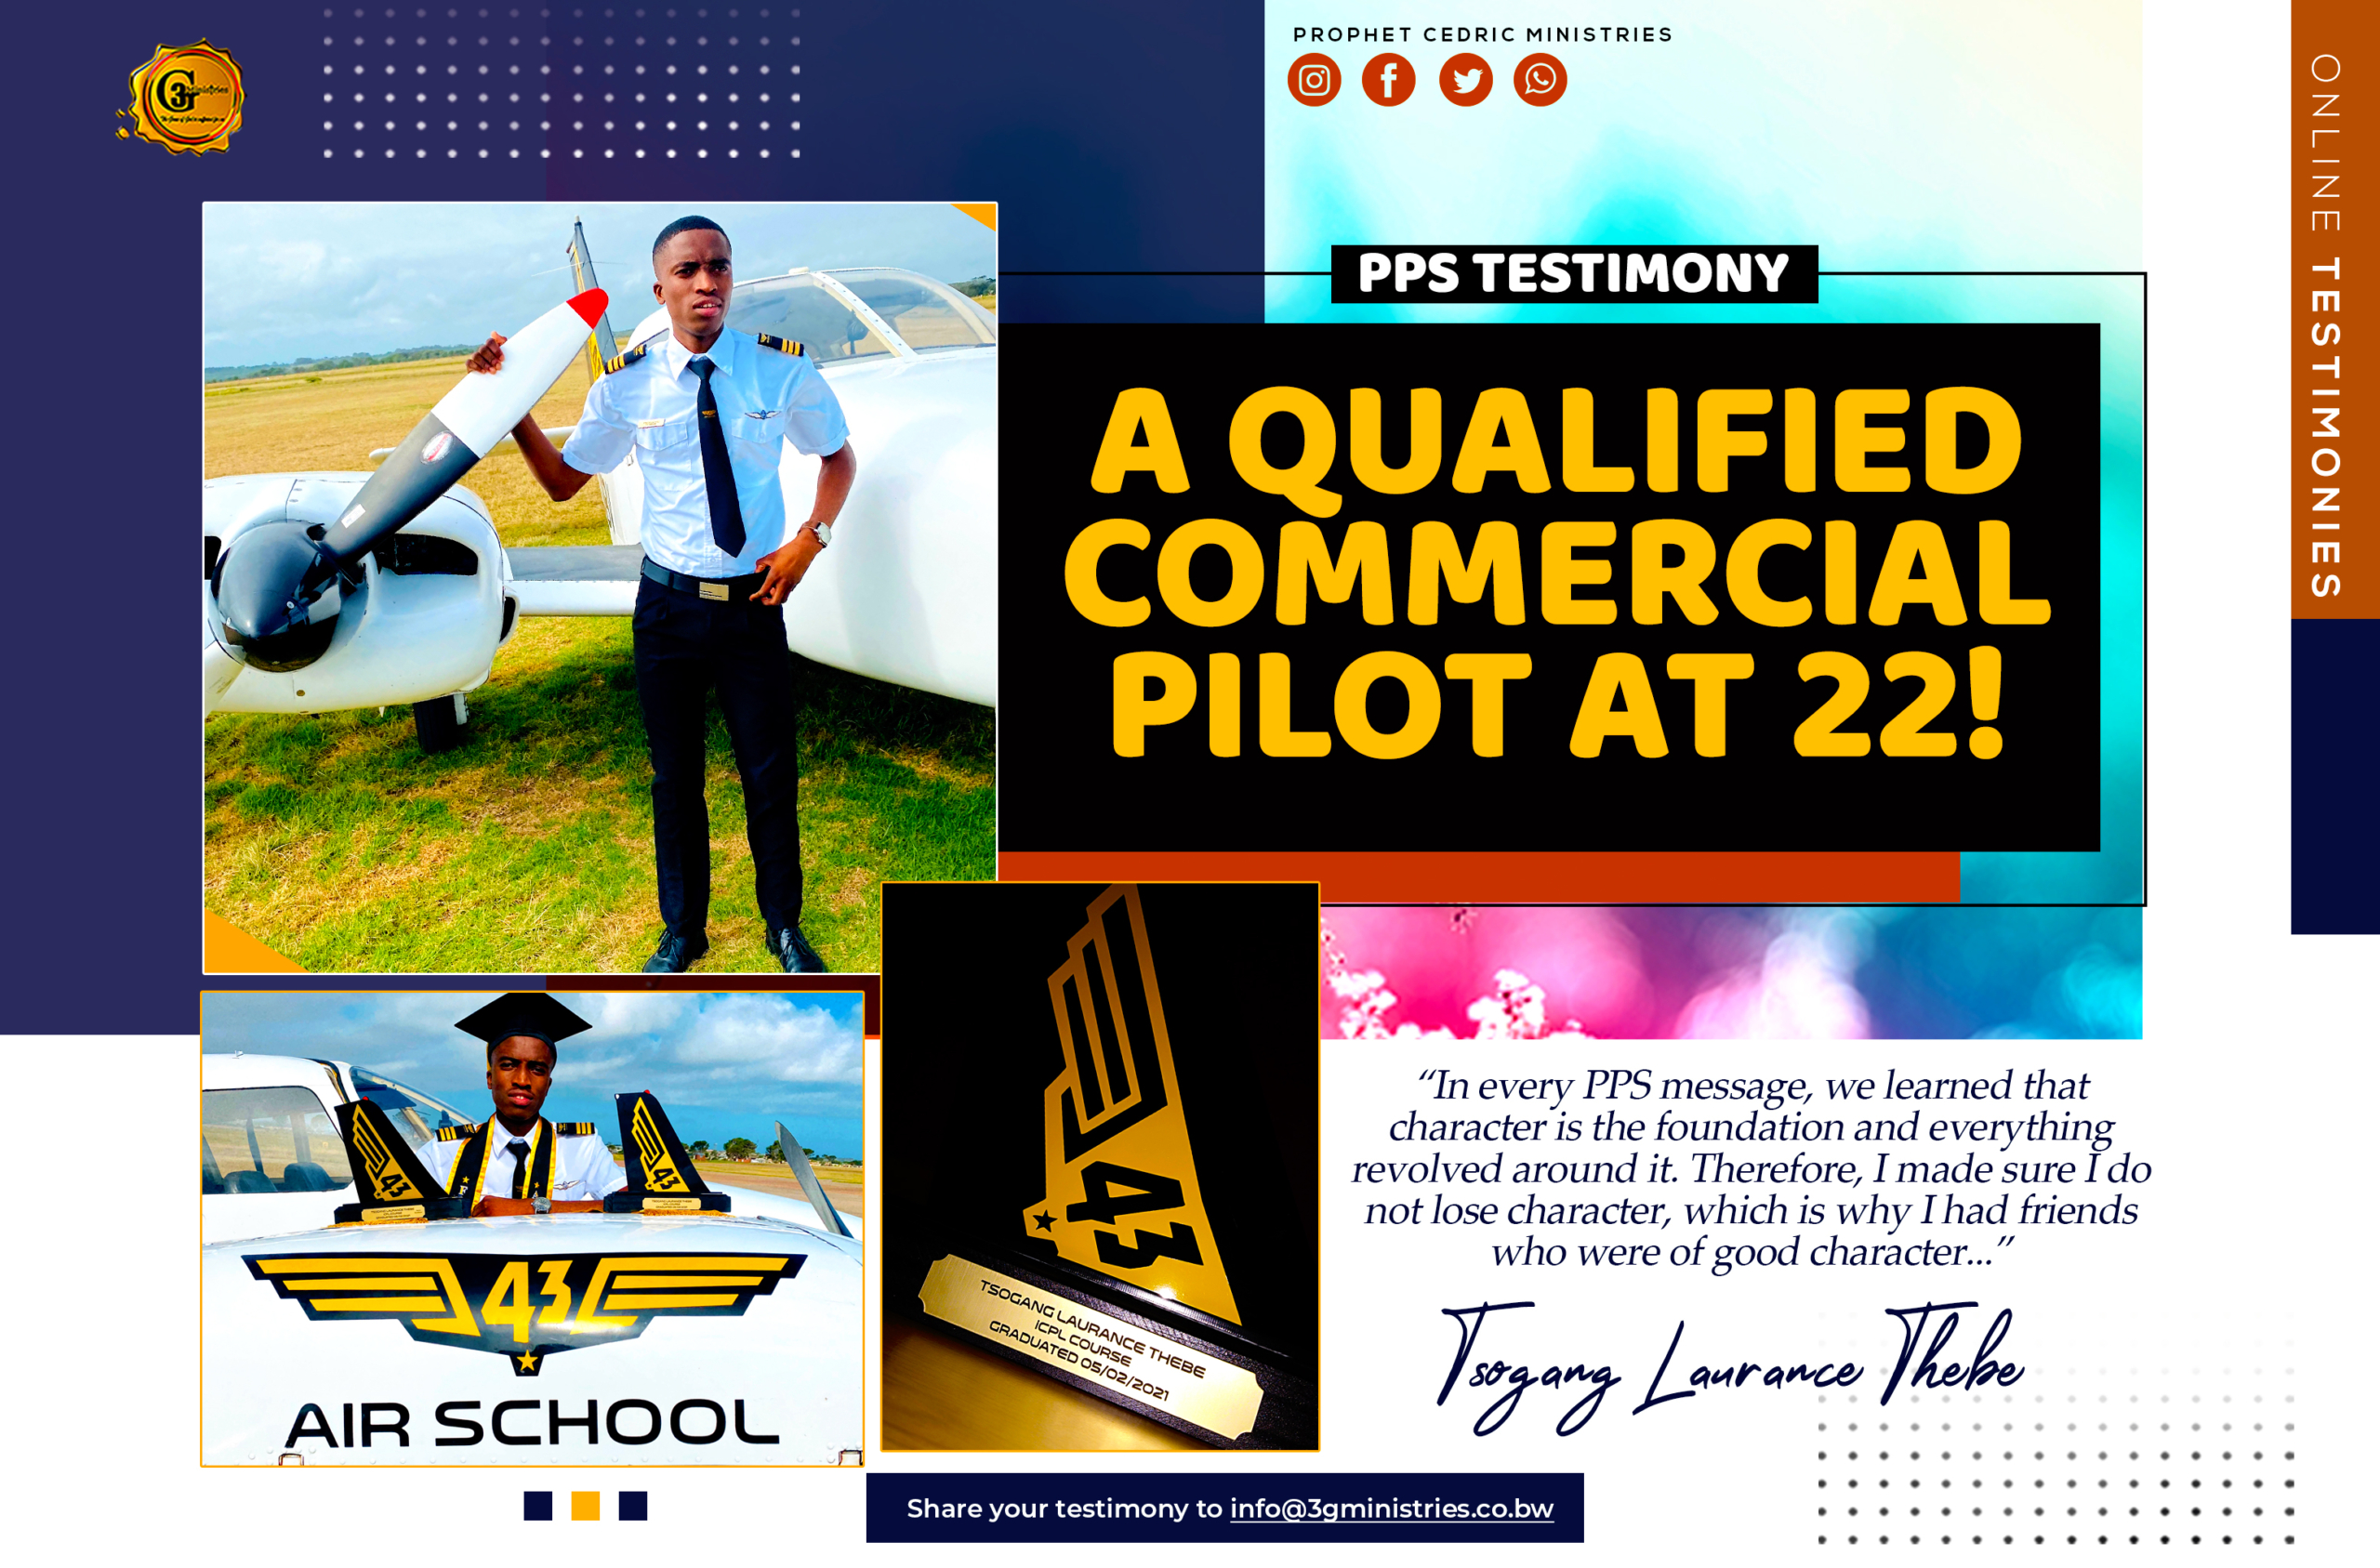 A QUALIFIED COMMERCIAL PILOT AT 22!